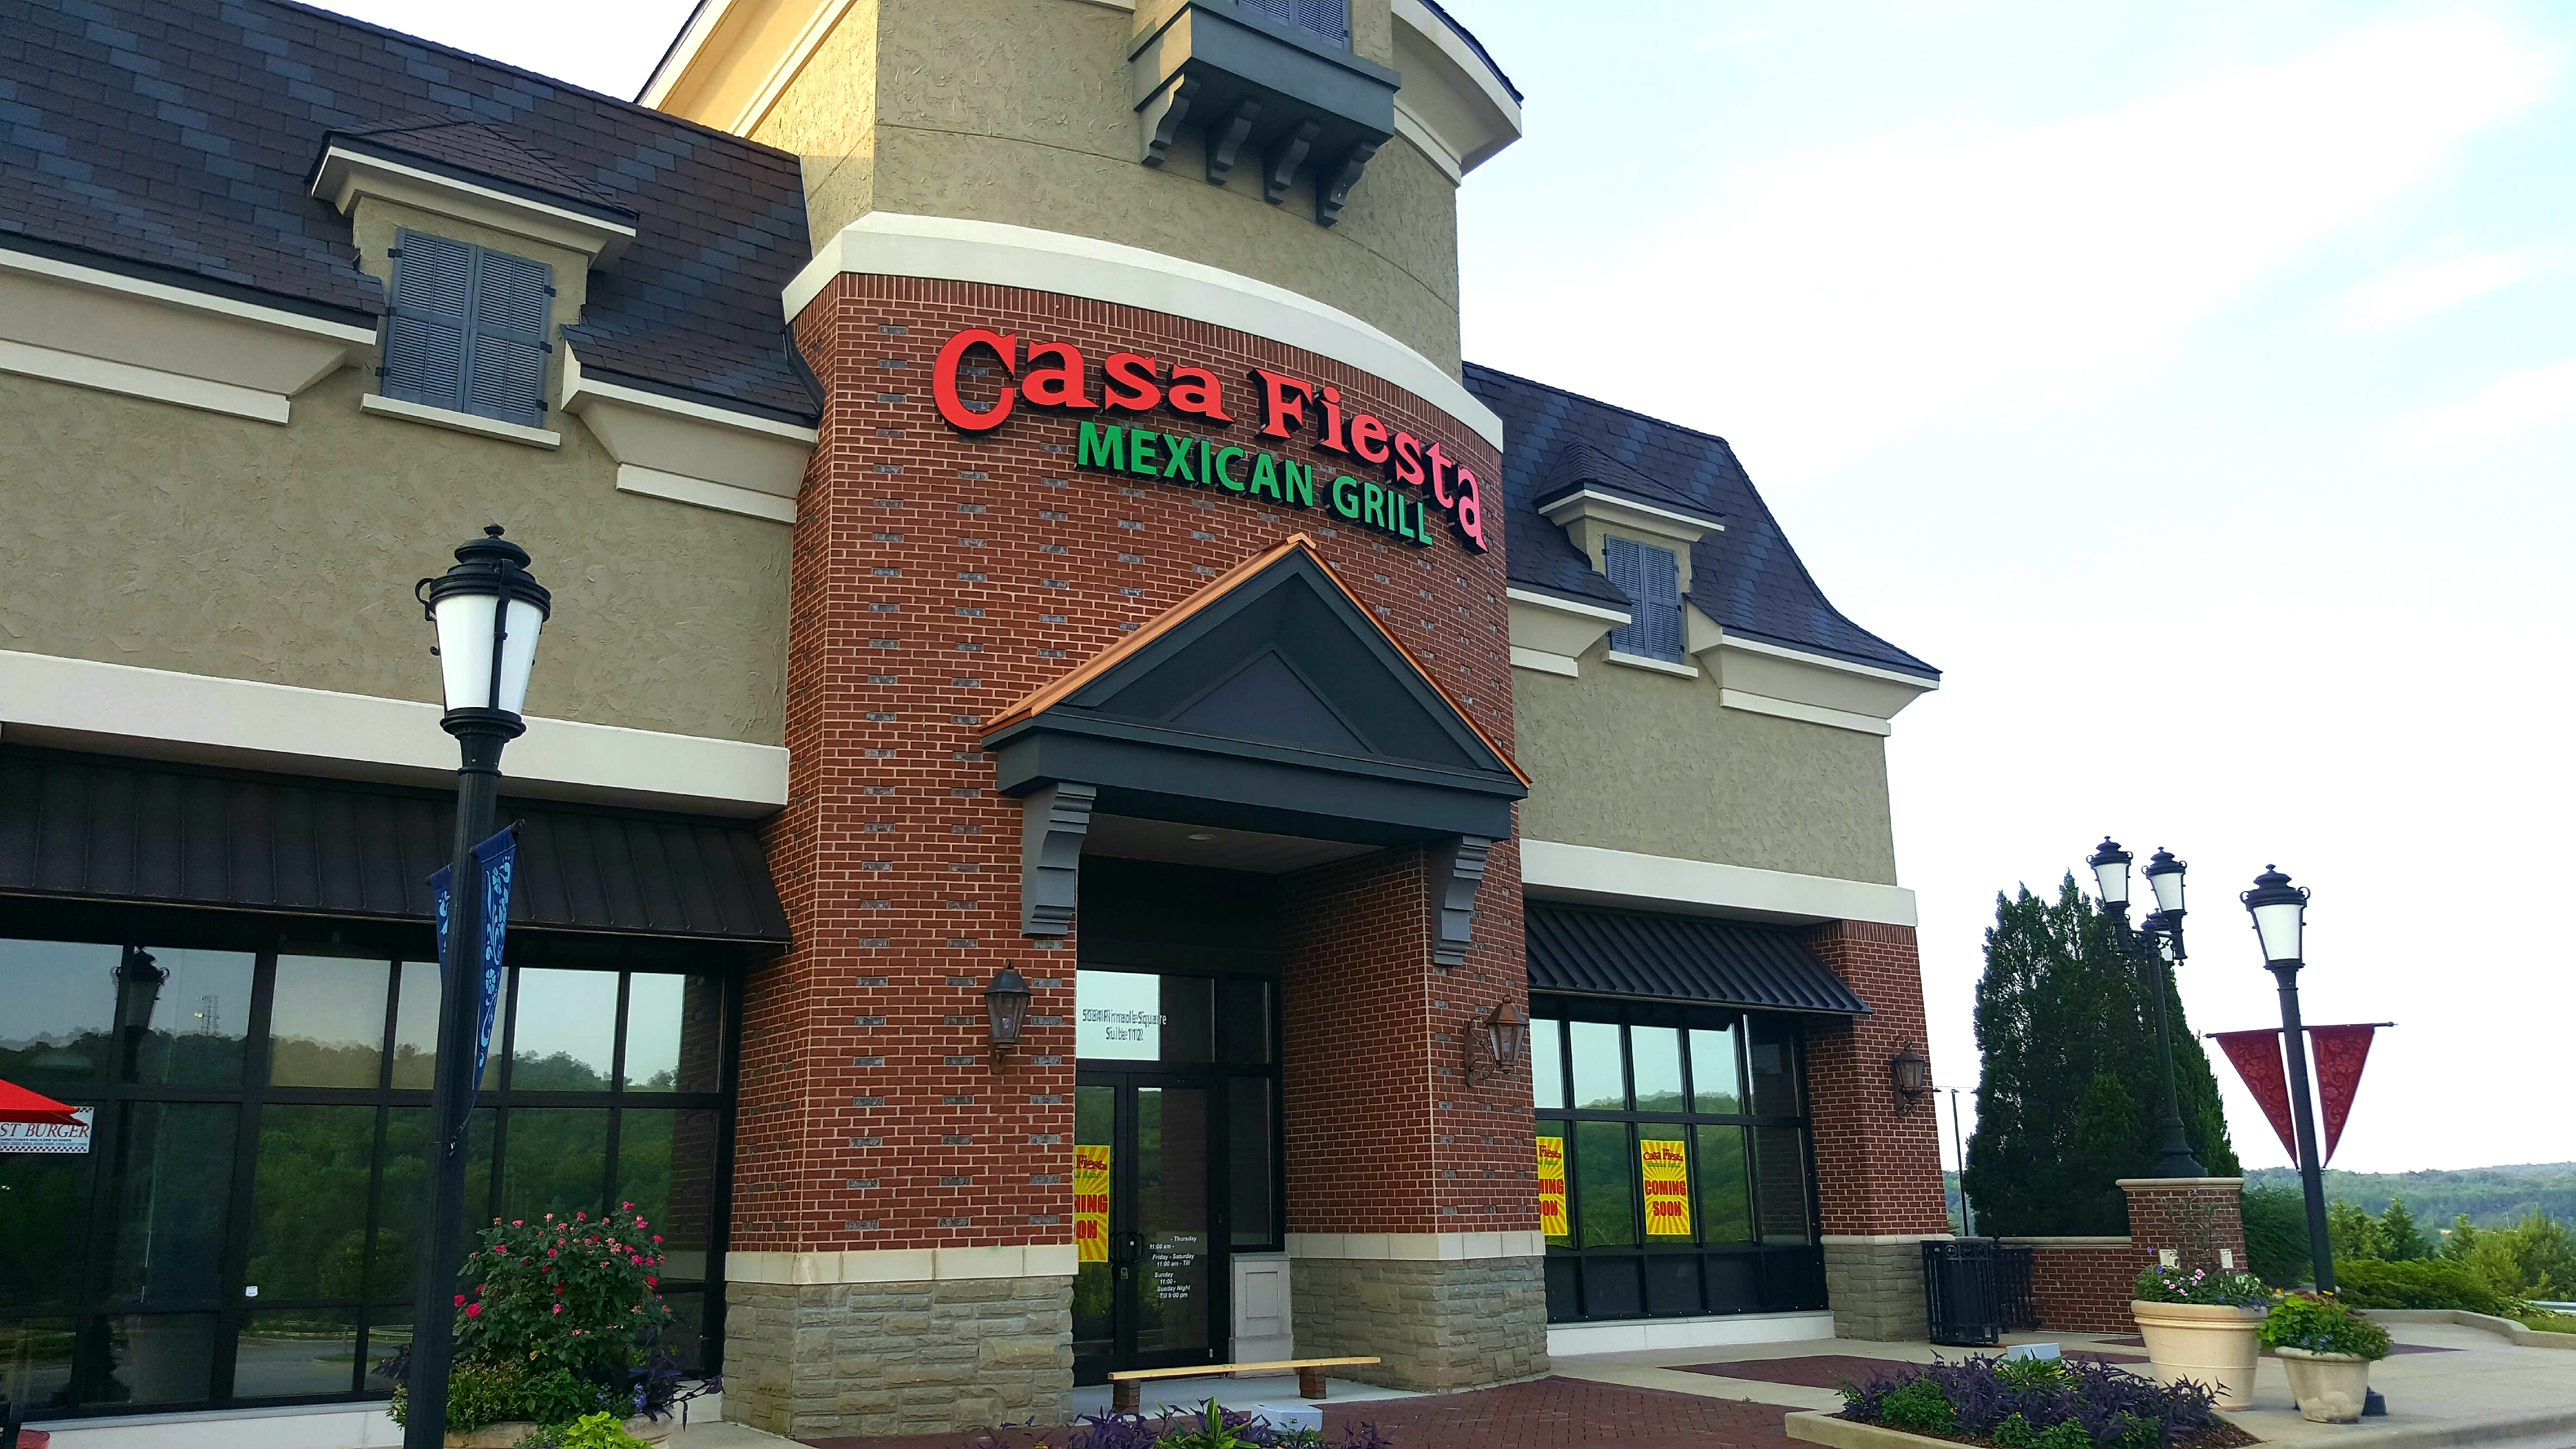 Chipotle, Casa Fiesta the latest additions to Trussville dining choices